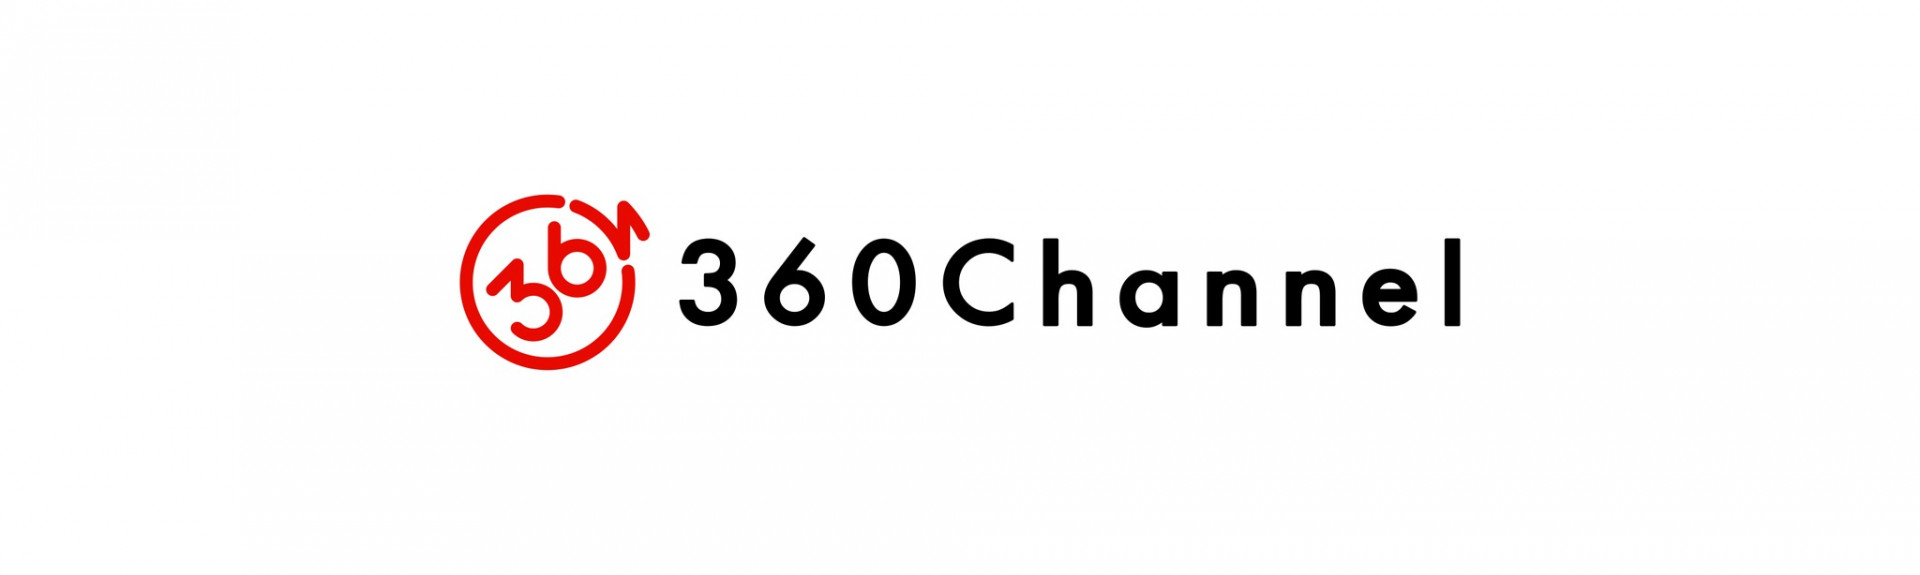 360Channel